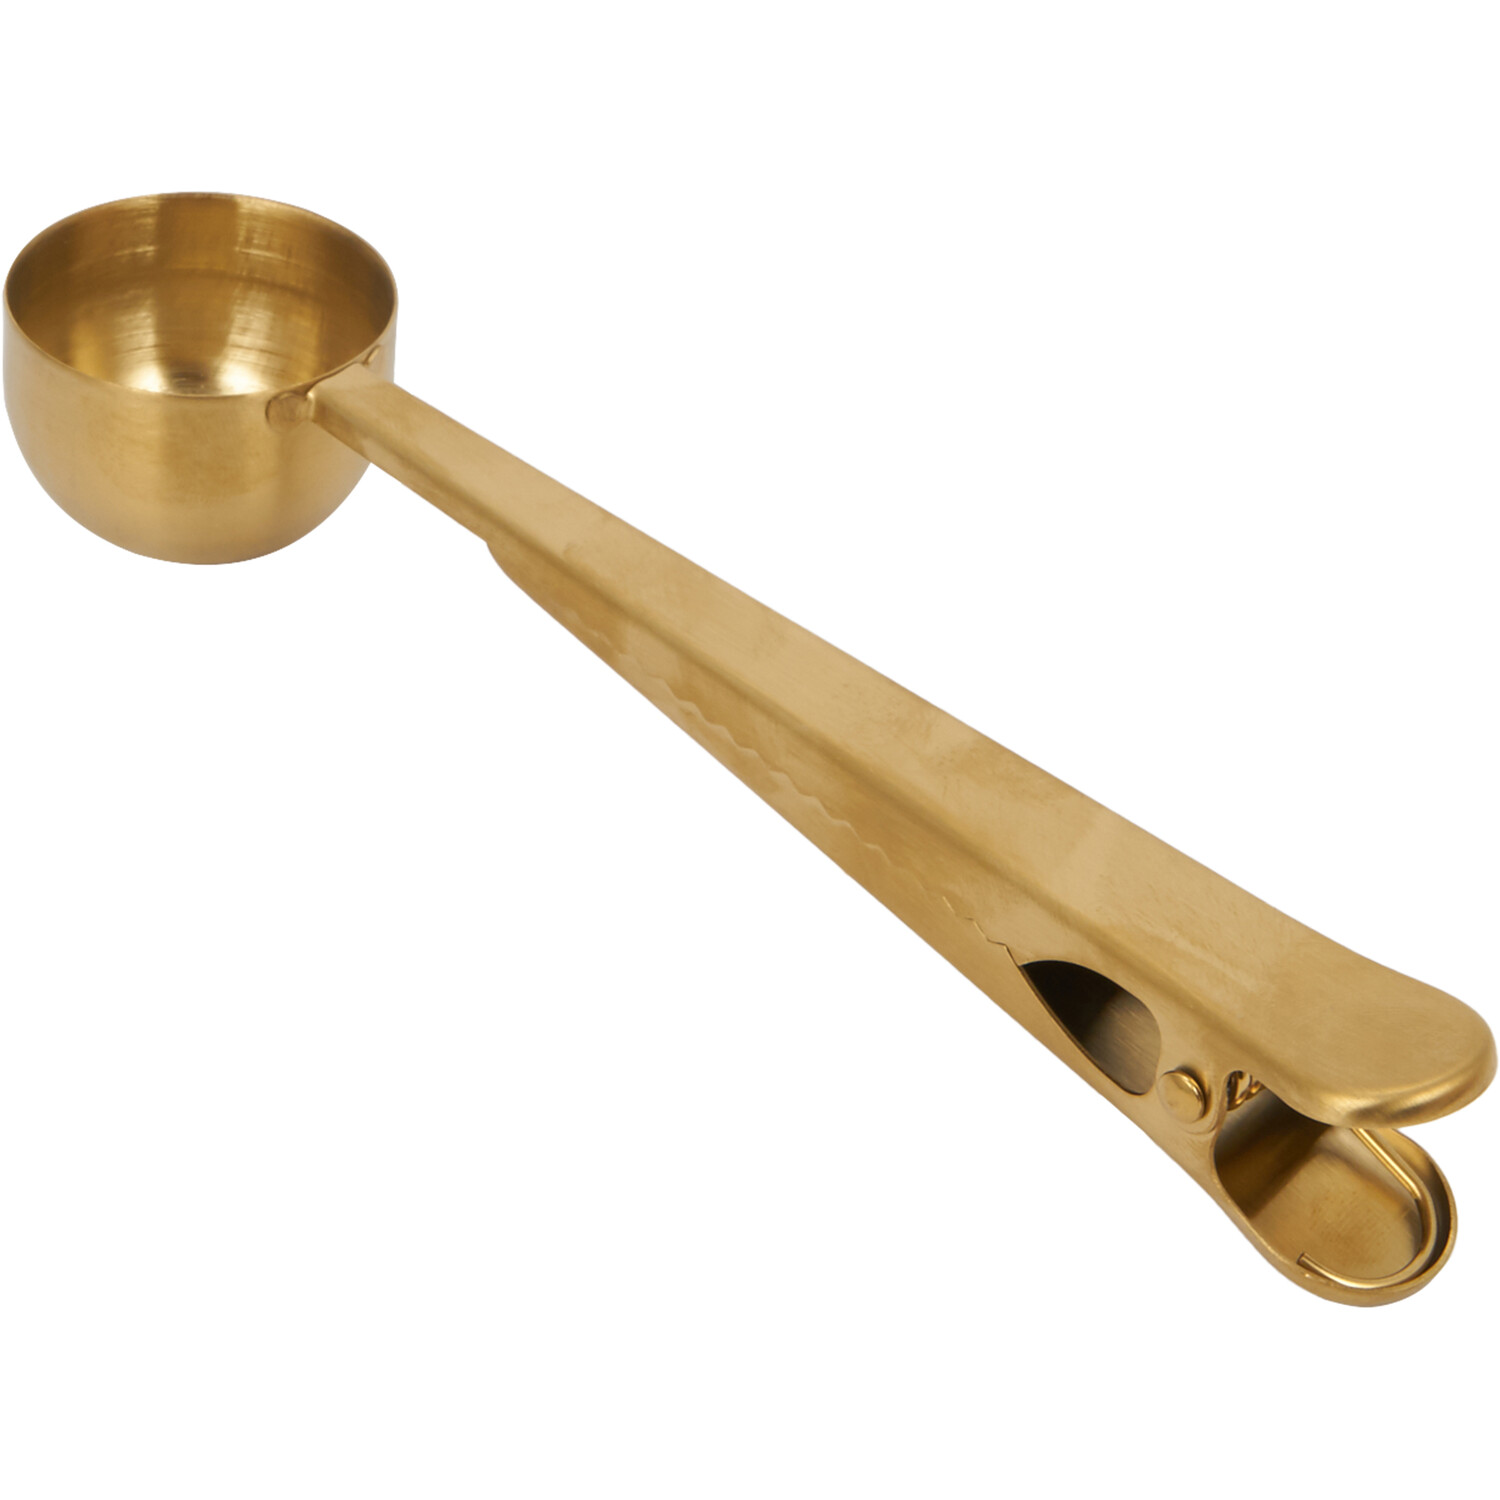 Kaiseki 2-in-1 Coffee Scoop and Clip - Gold Image 2